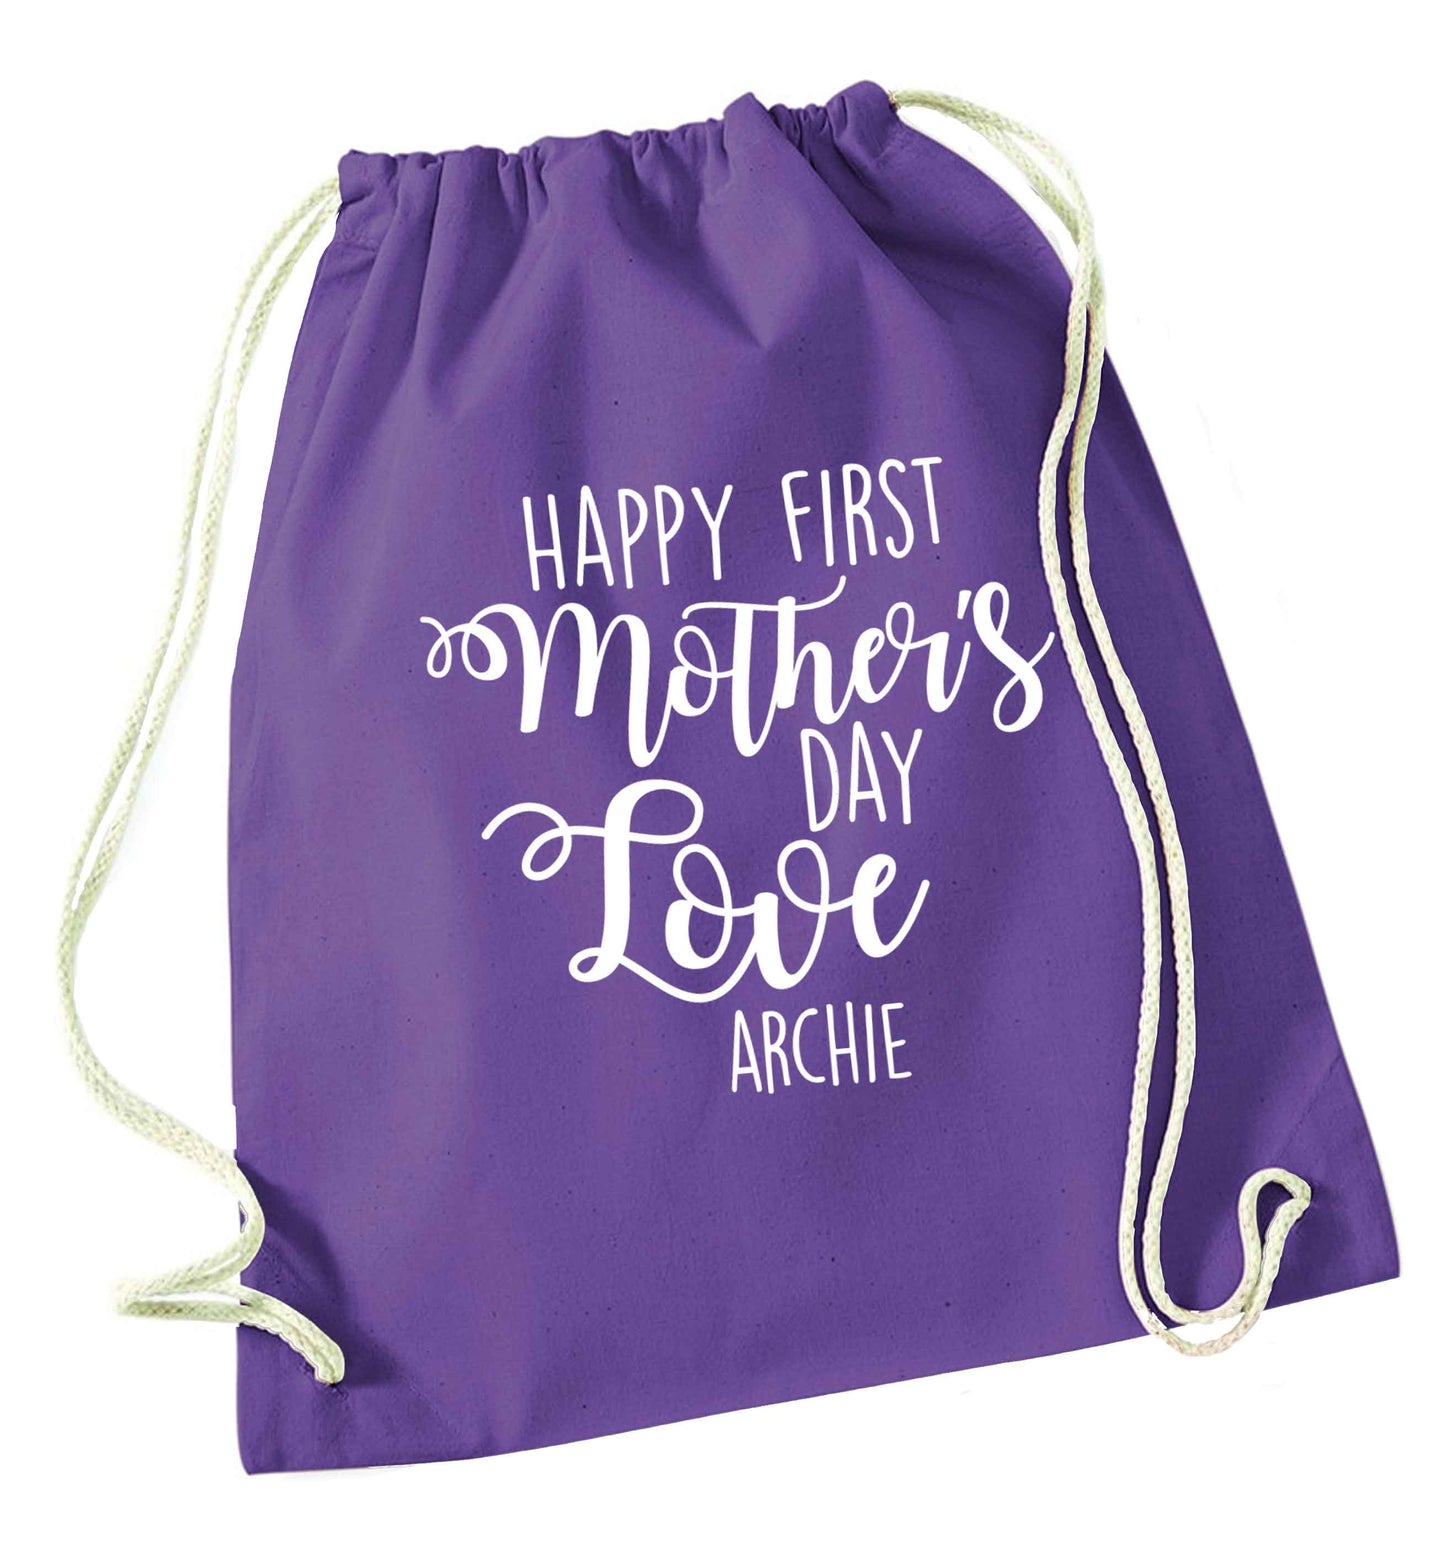 Mummy's first mother's day! purple drawstring bag